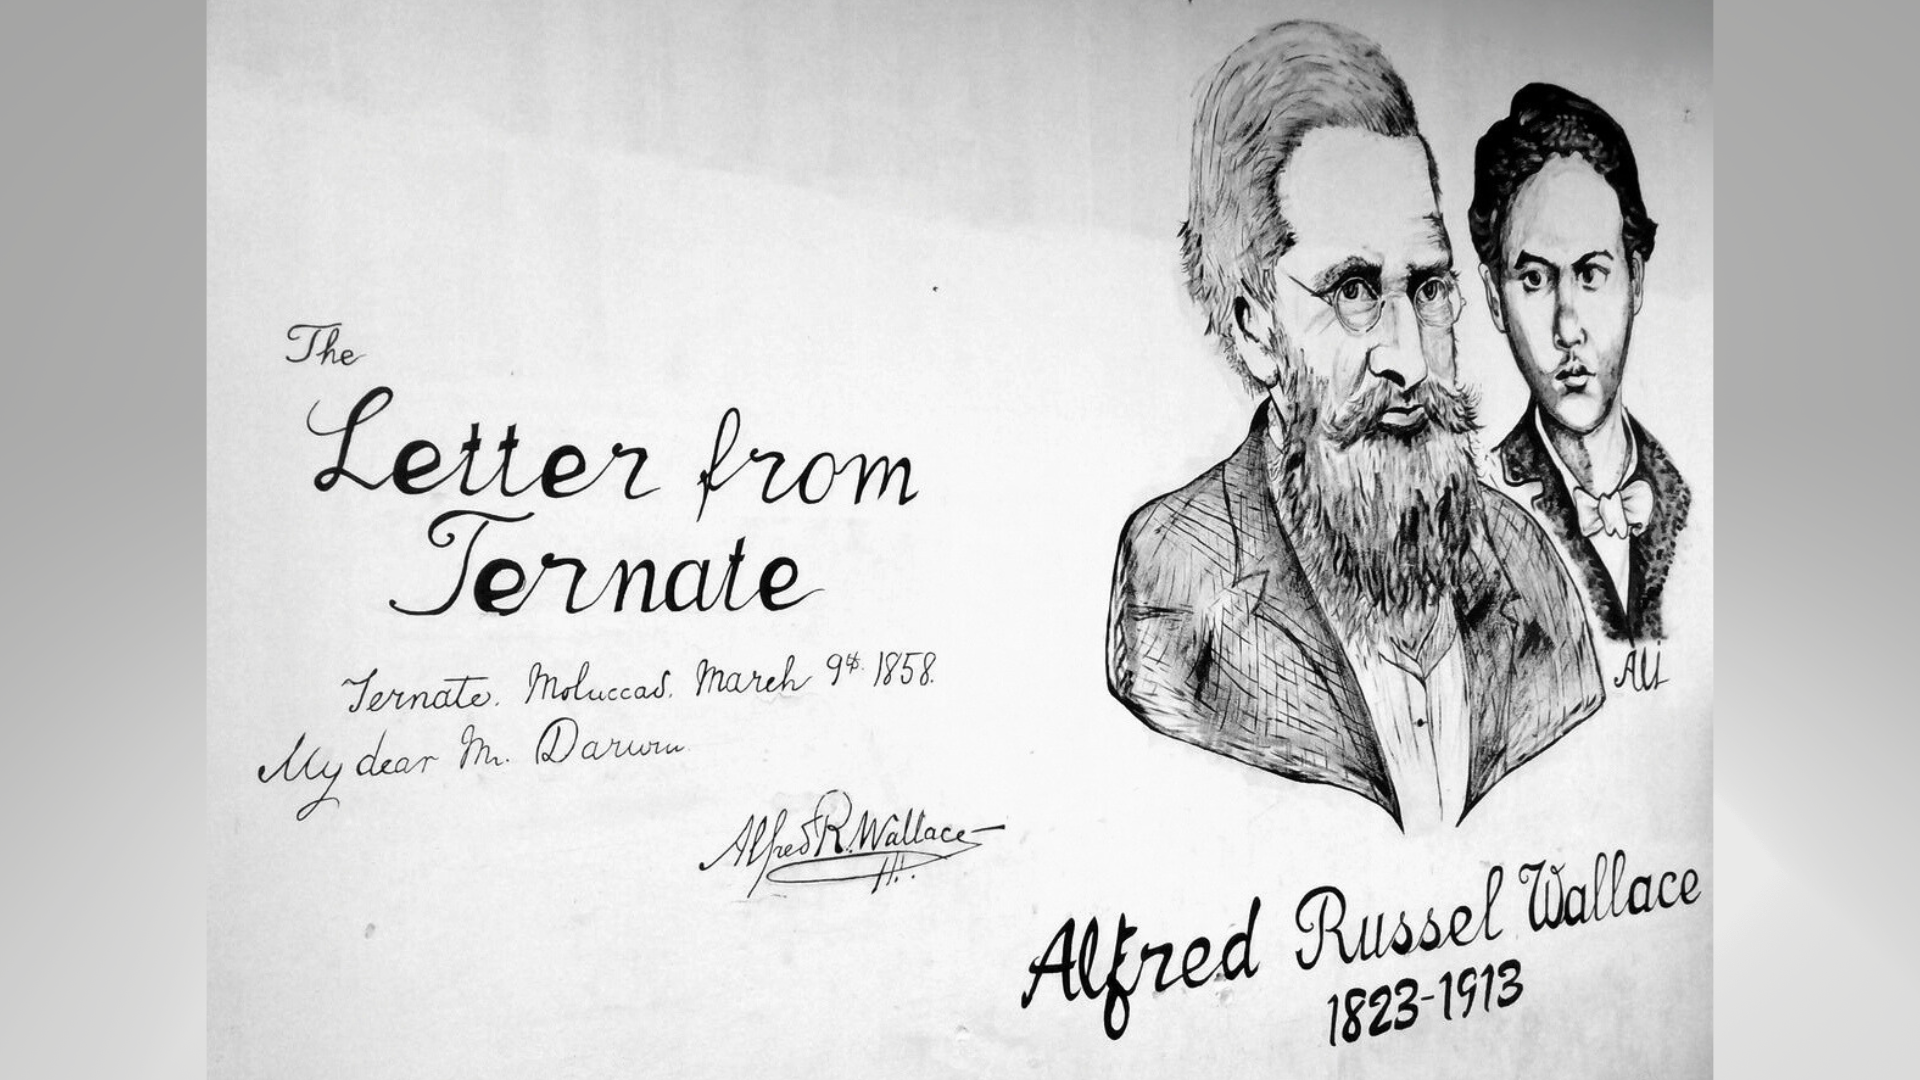 A graffitti signboard in Ali signboard in Ternate, Indonesia features the images of Alfred Russel Wallace and his assistant, known only as "Ali".